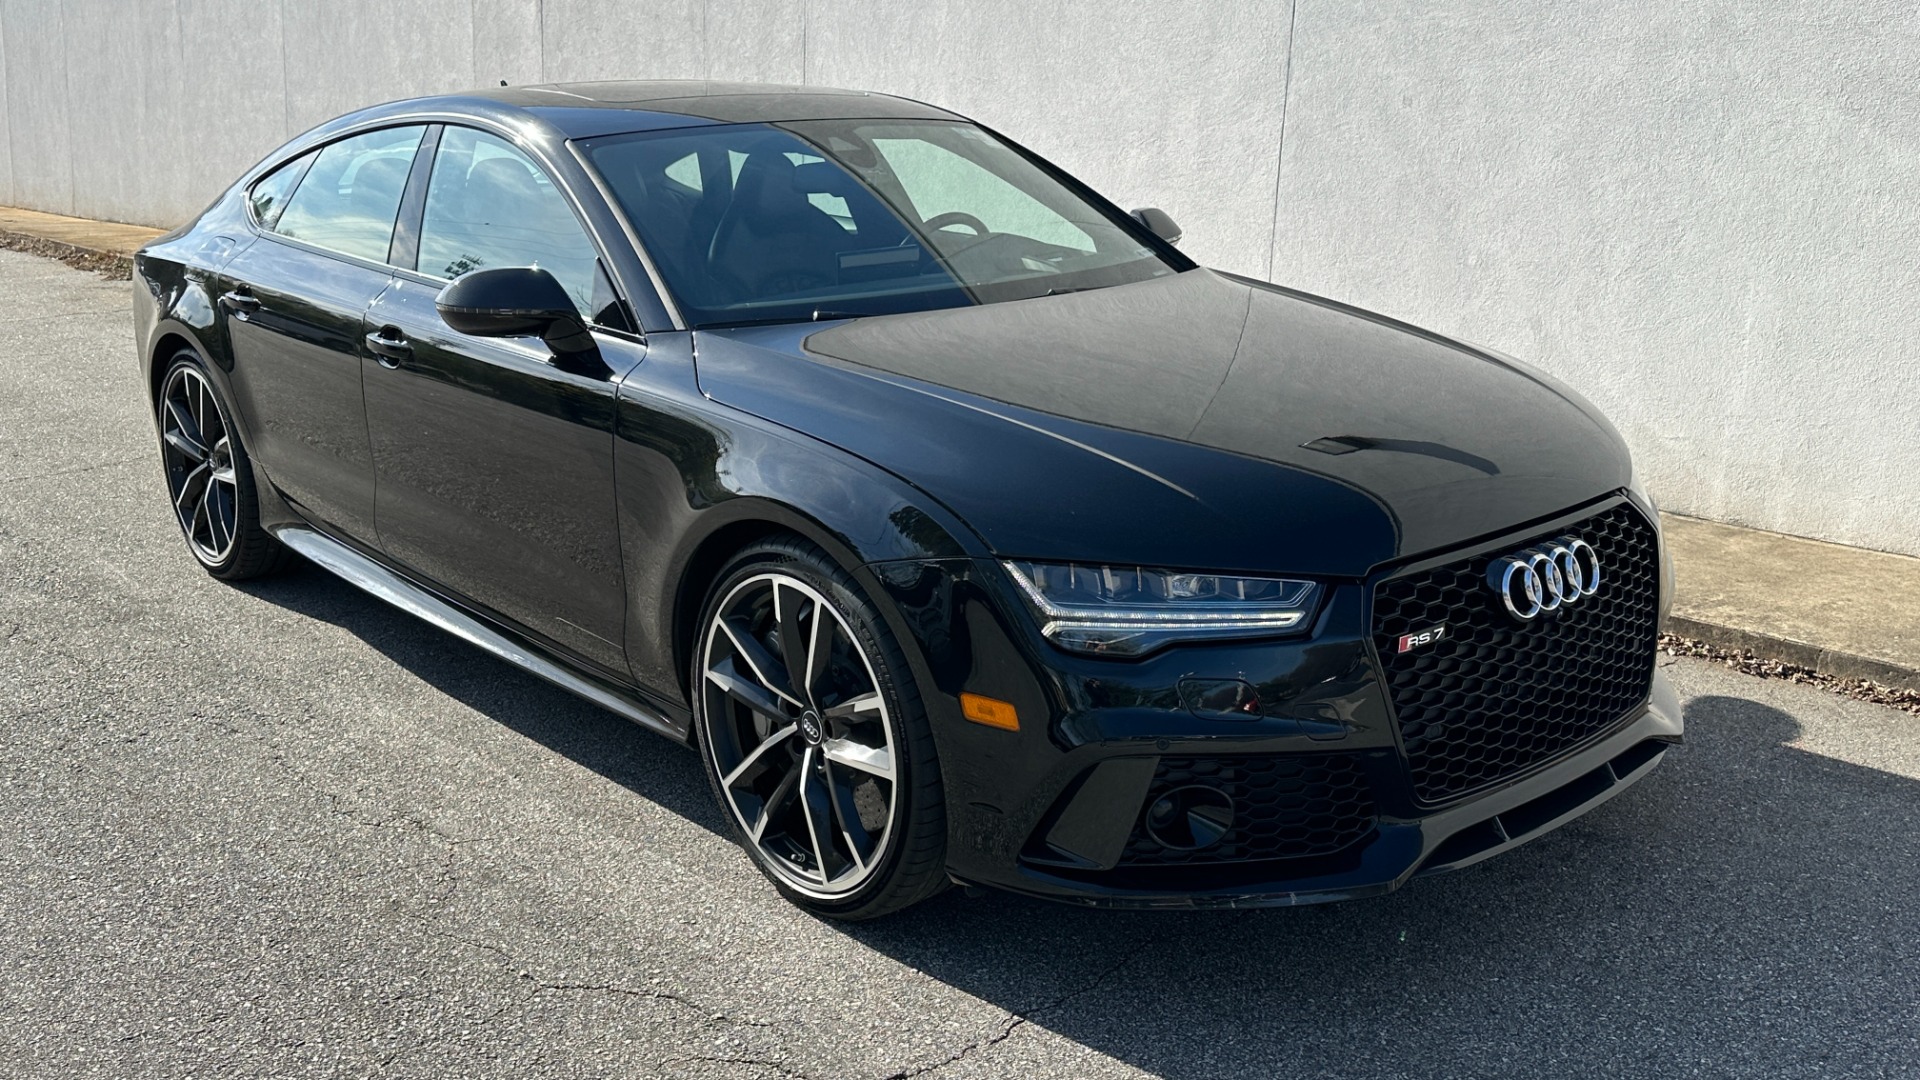 Used 2017 Audi RS 7 PERFORMANCE PRESTIGE / 4.0T 605HP / NIGHT VISION / DRIVER ASSIST / 21IN WHL for sale $80,995 at Formula Imports in Charlotte NC 28227 5